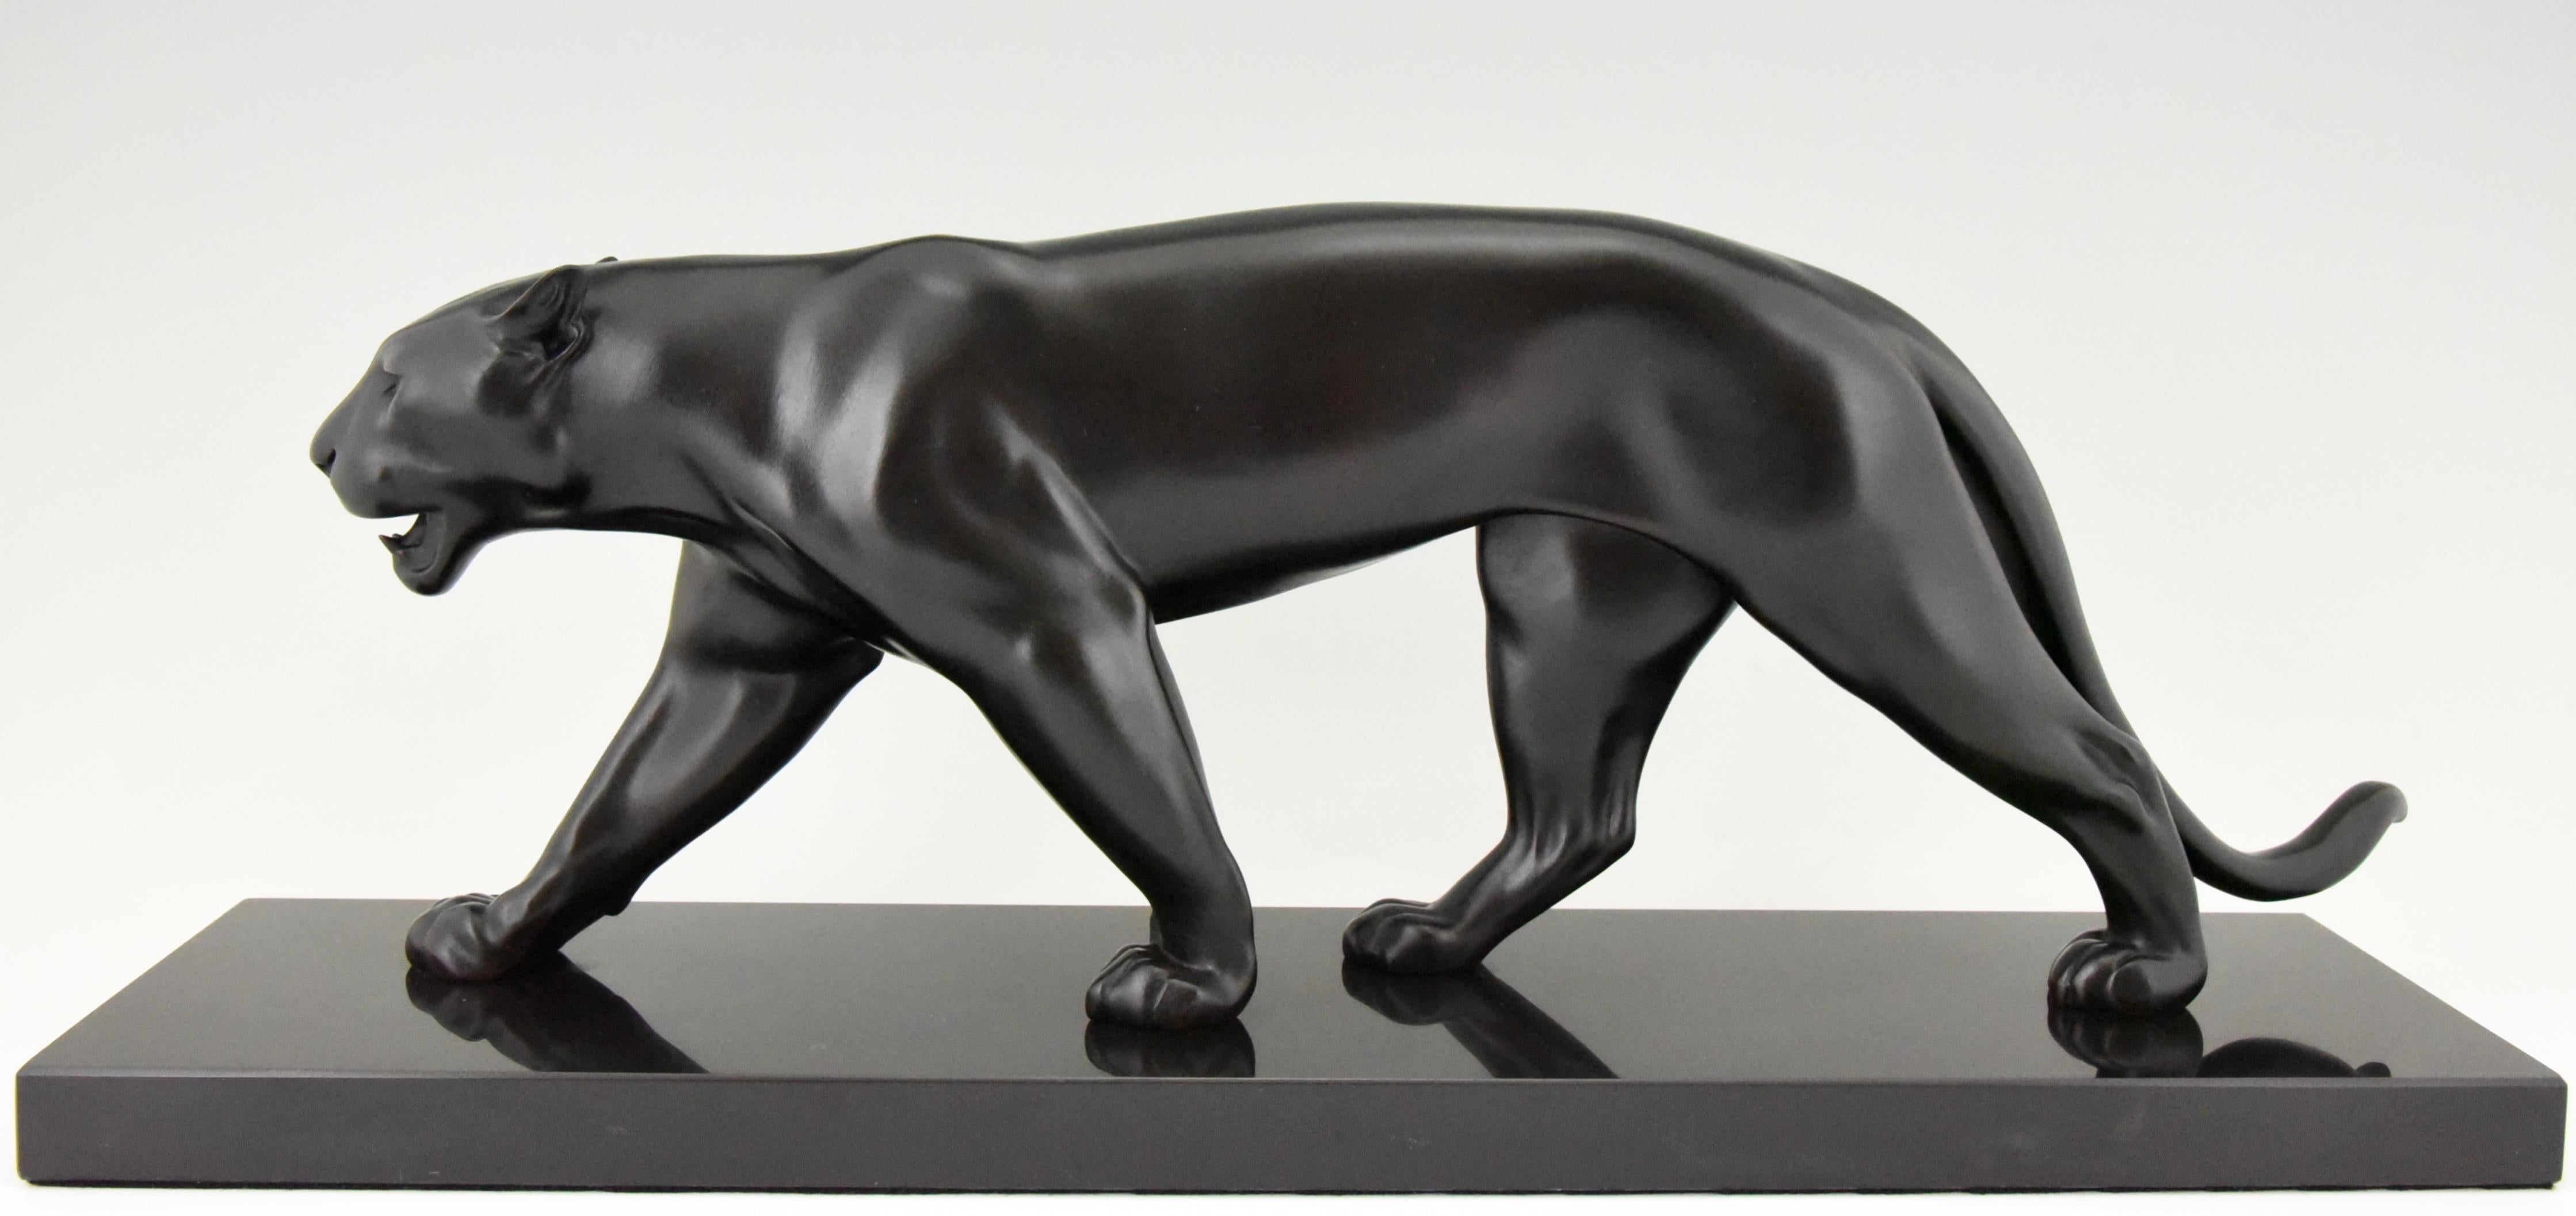 Art Deco style panther sculpture BAGHERA by Max Le Verrier.
Signed Le Verrier and with foundry mark Le Verrier Paris. 
Designed around 1920. Posthumous contemporary cast. 
Patinated Art Metal on black marble base. 

Handcrafted. 
Original sculpture